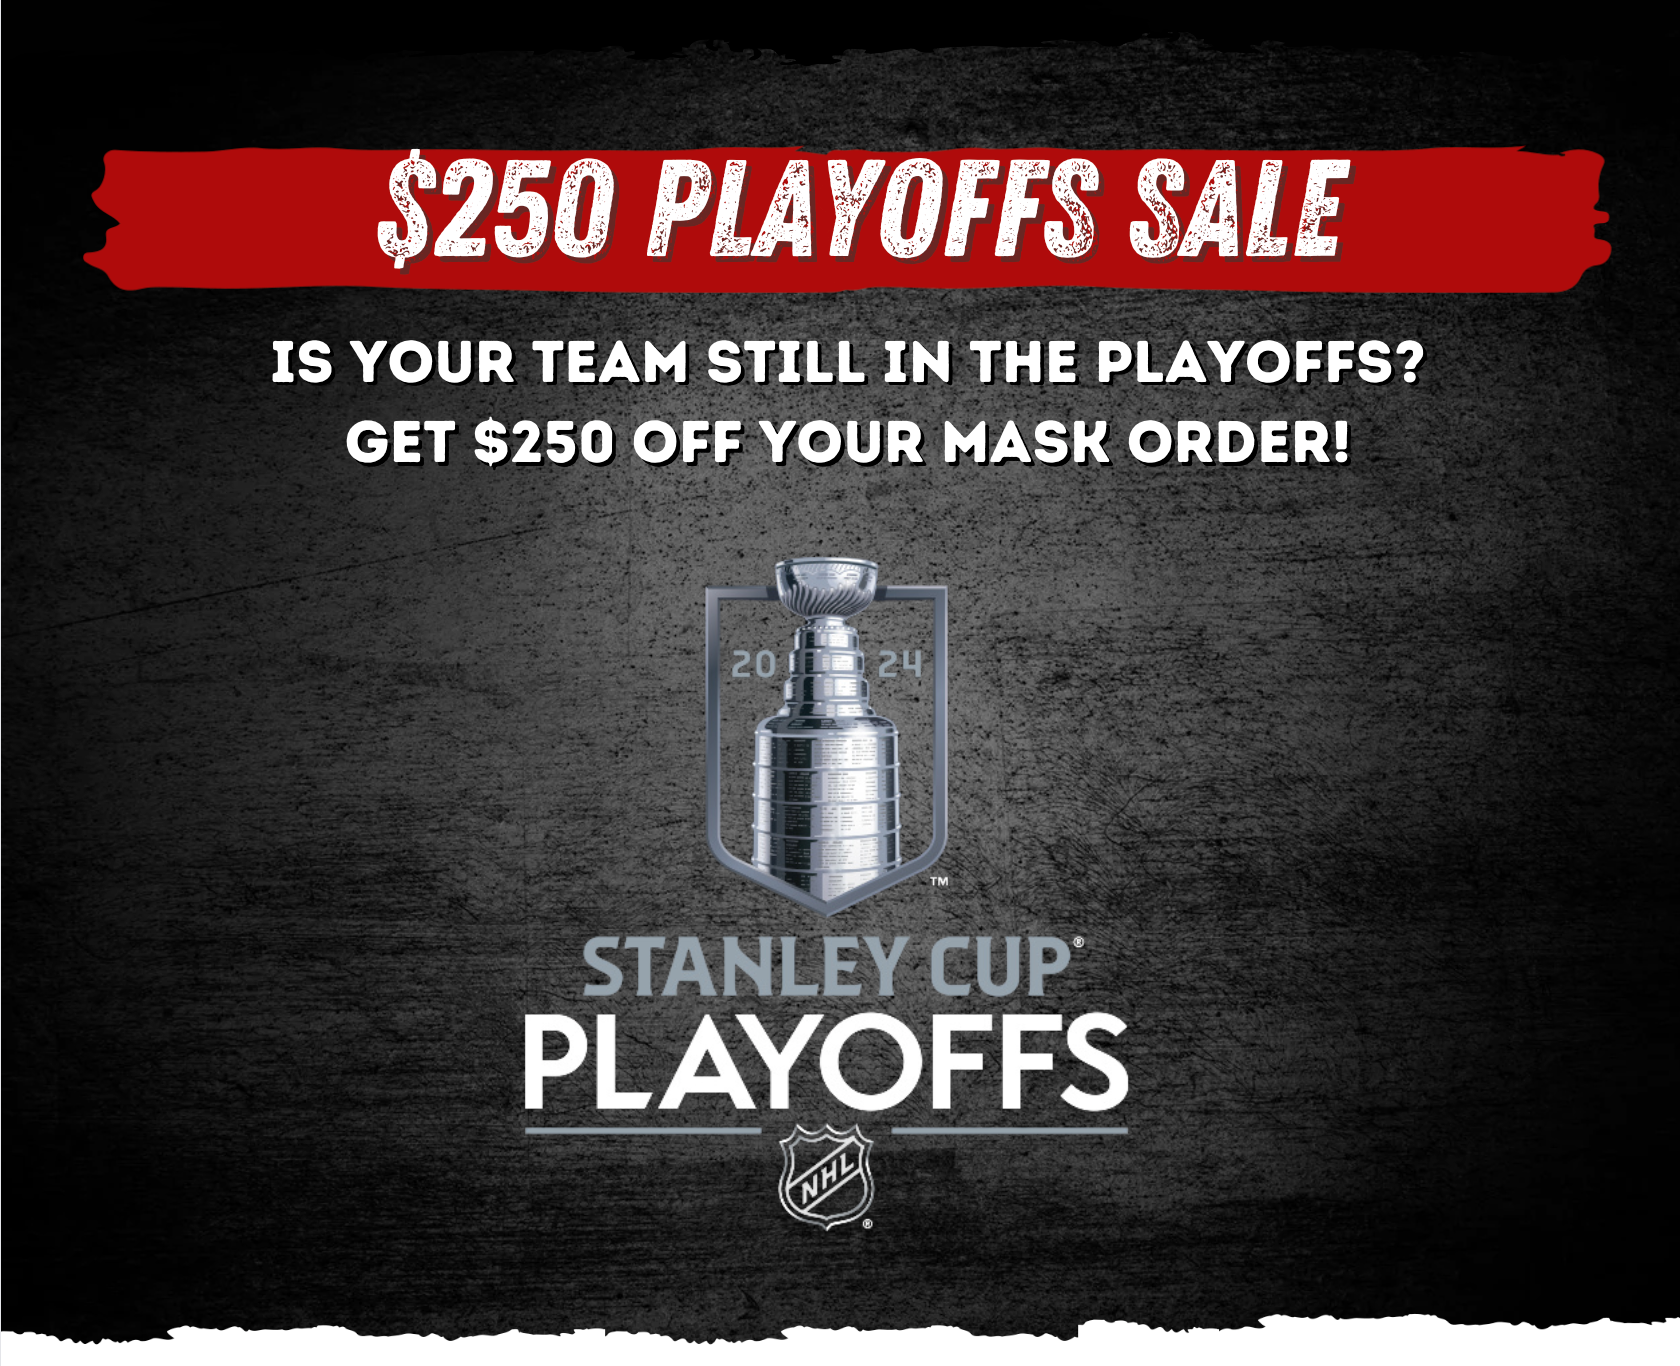 NHL Playoff Sale! Get $250 OFF your team in the playoffs!